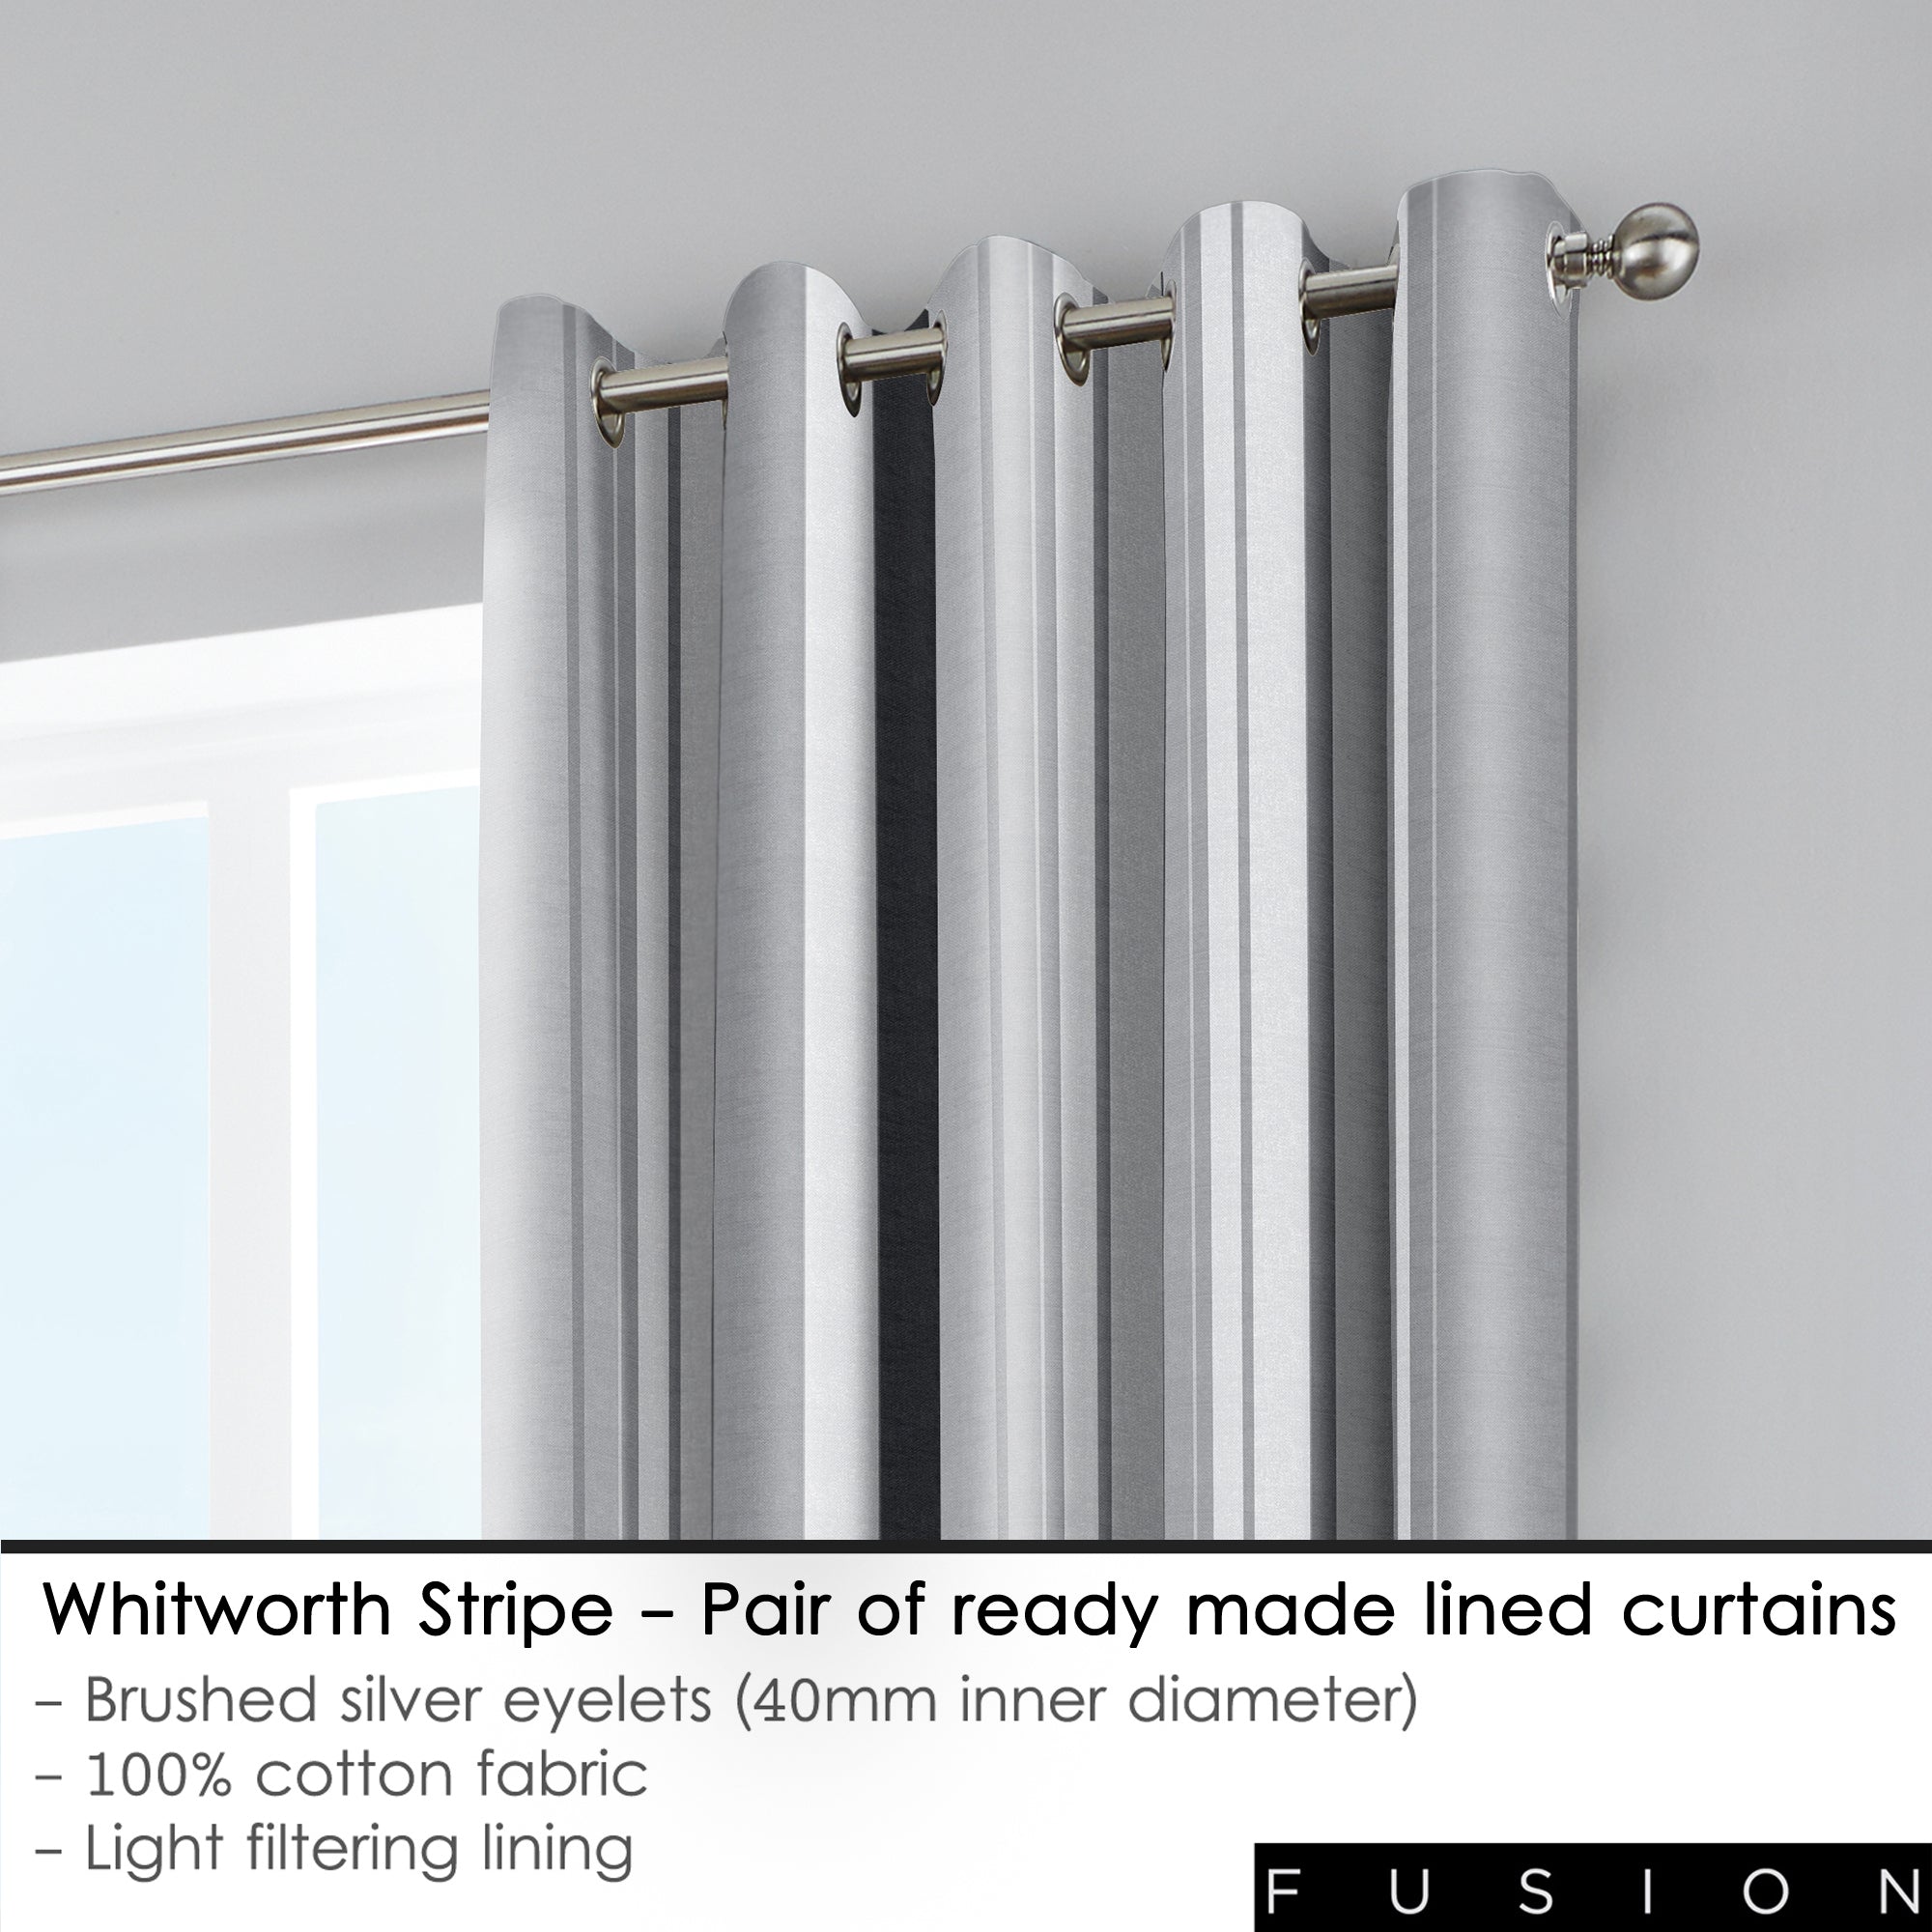 Whitworth Stripe - 100% Cotton Lined Eyelet Curtains in Grey - by Fusion